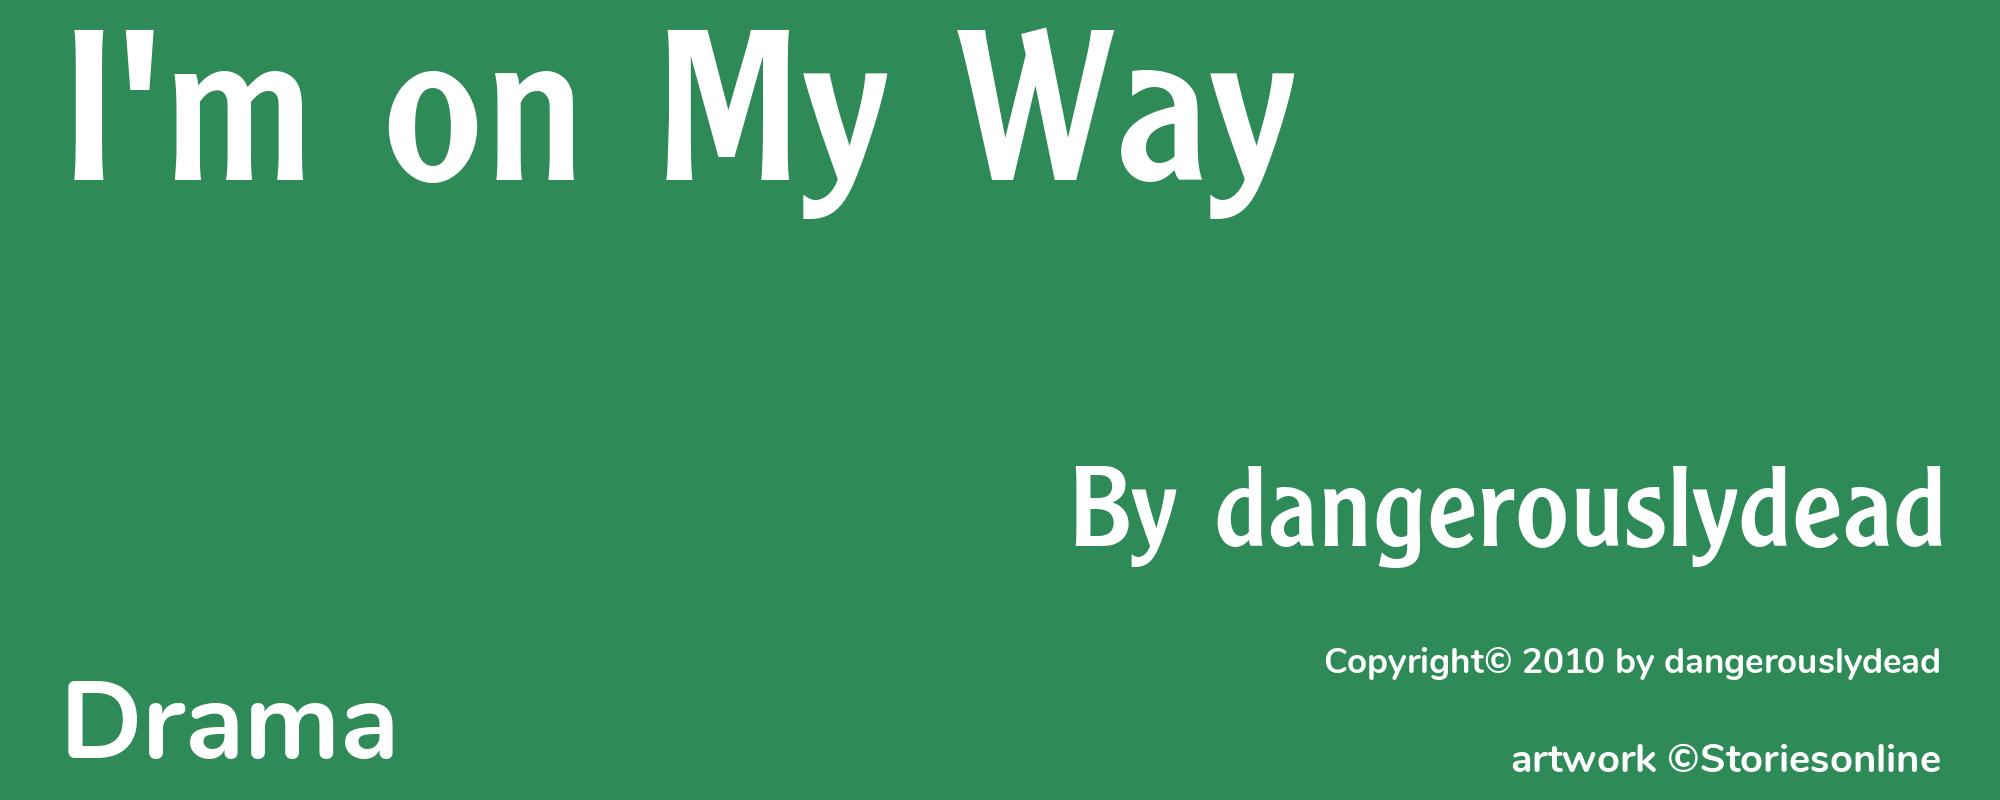 I'm on My Way - Cover